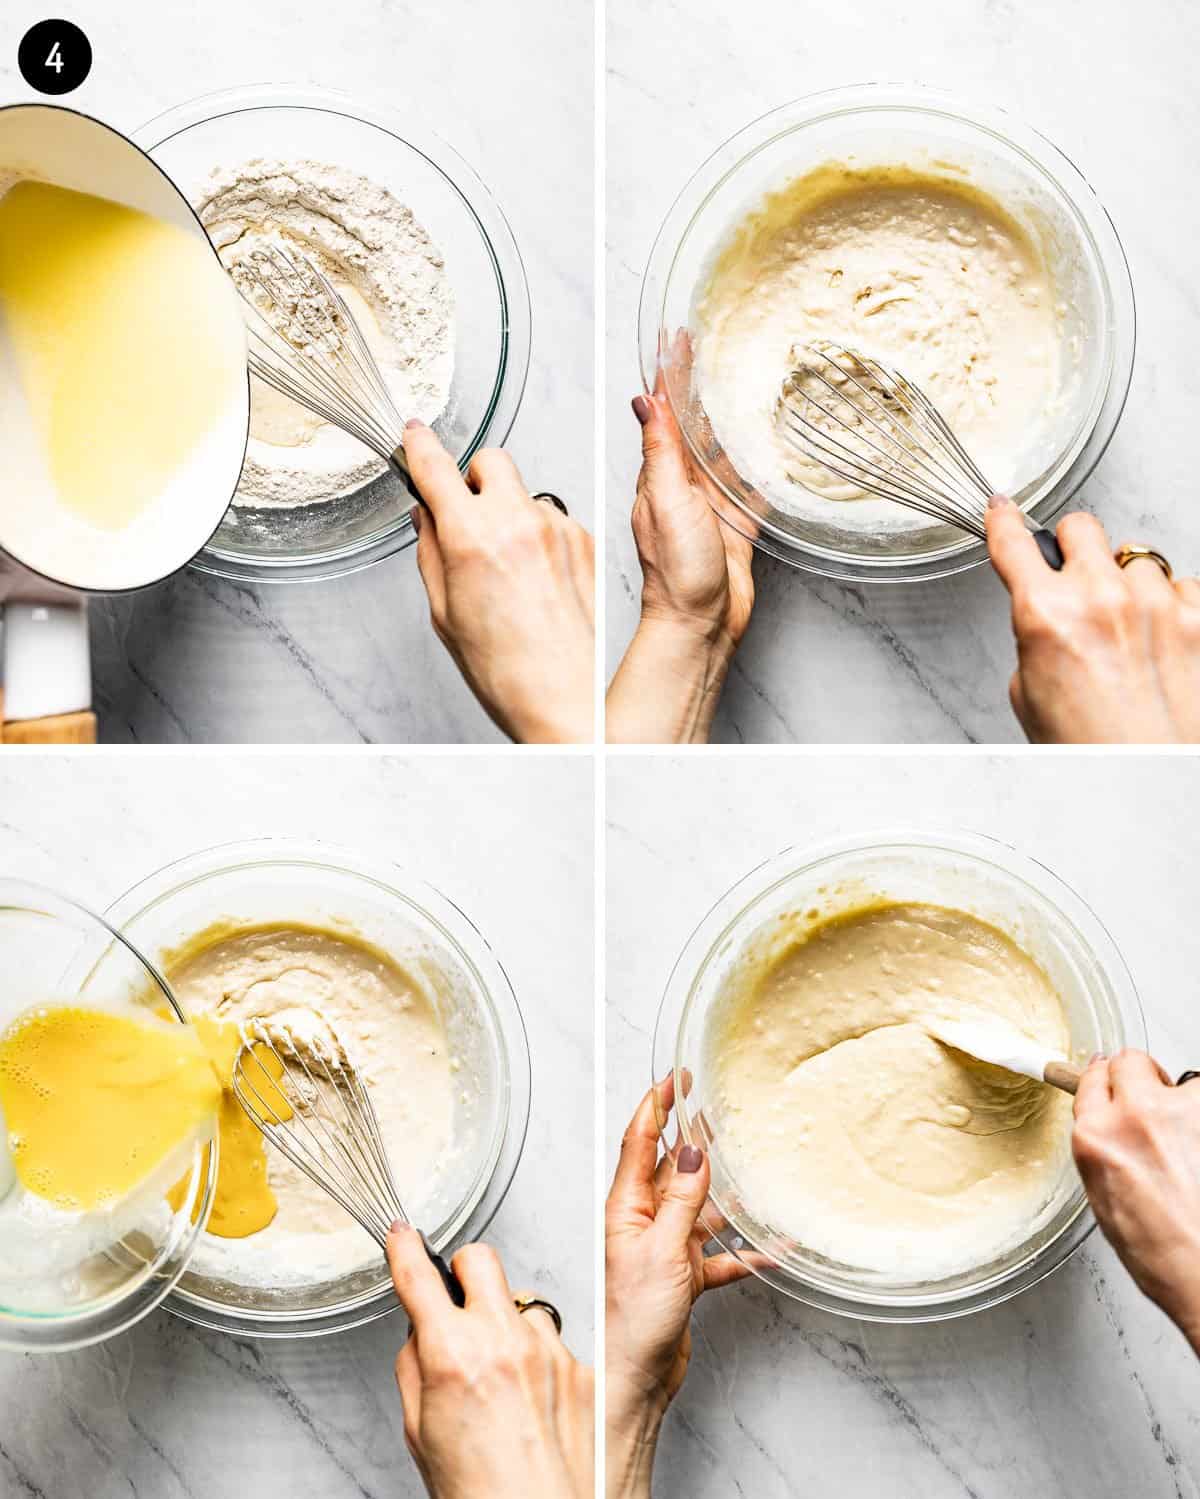 photos showing how to make the waffle batter